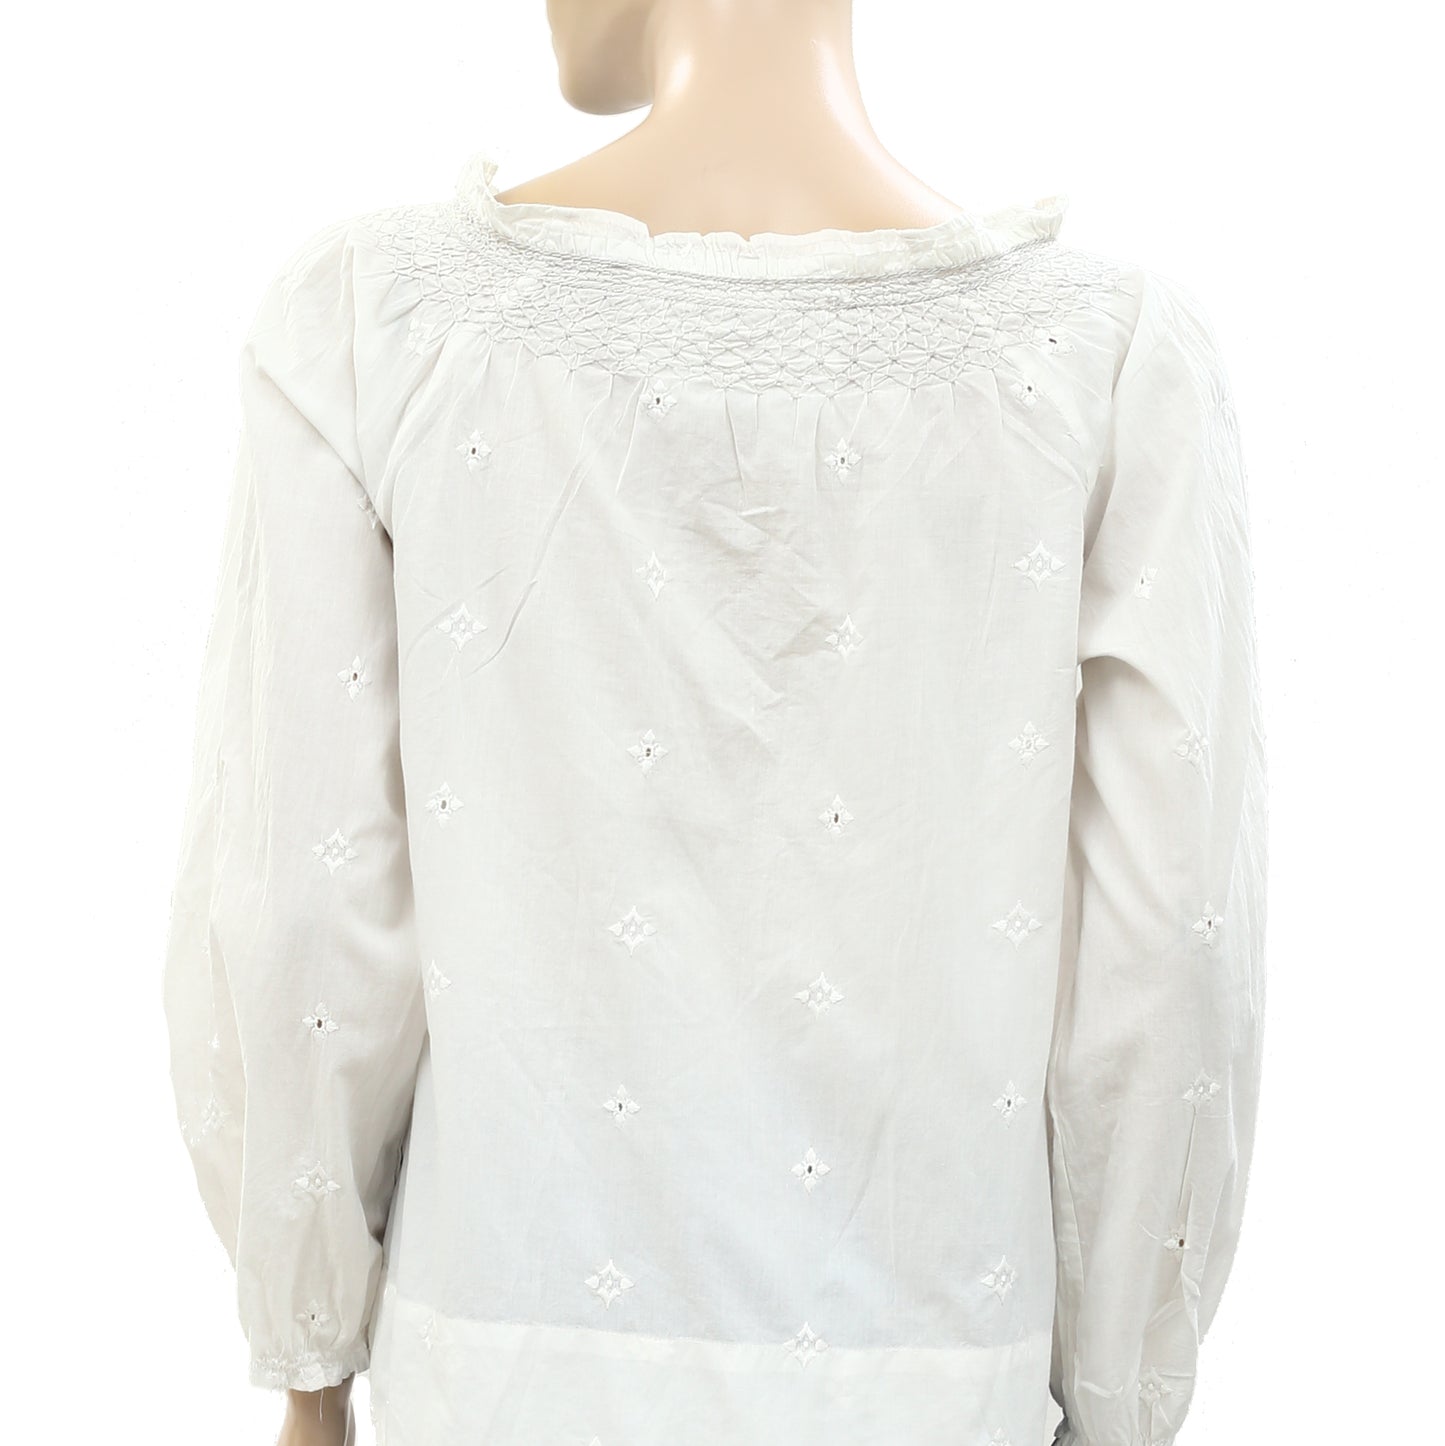 Odd Molly Anthropologie Eyelet Embroidered Tunic Top